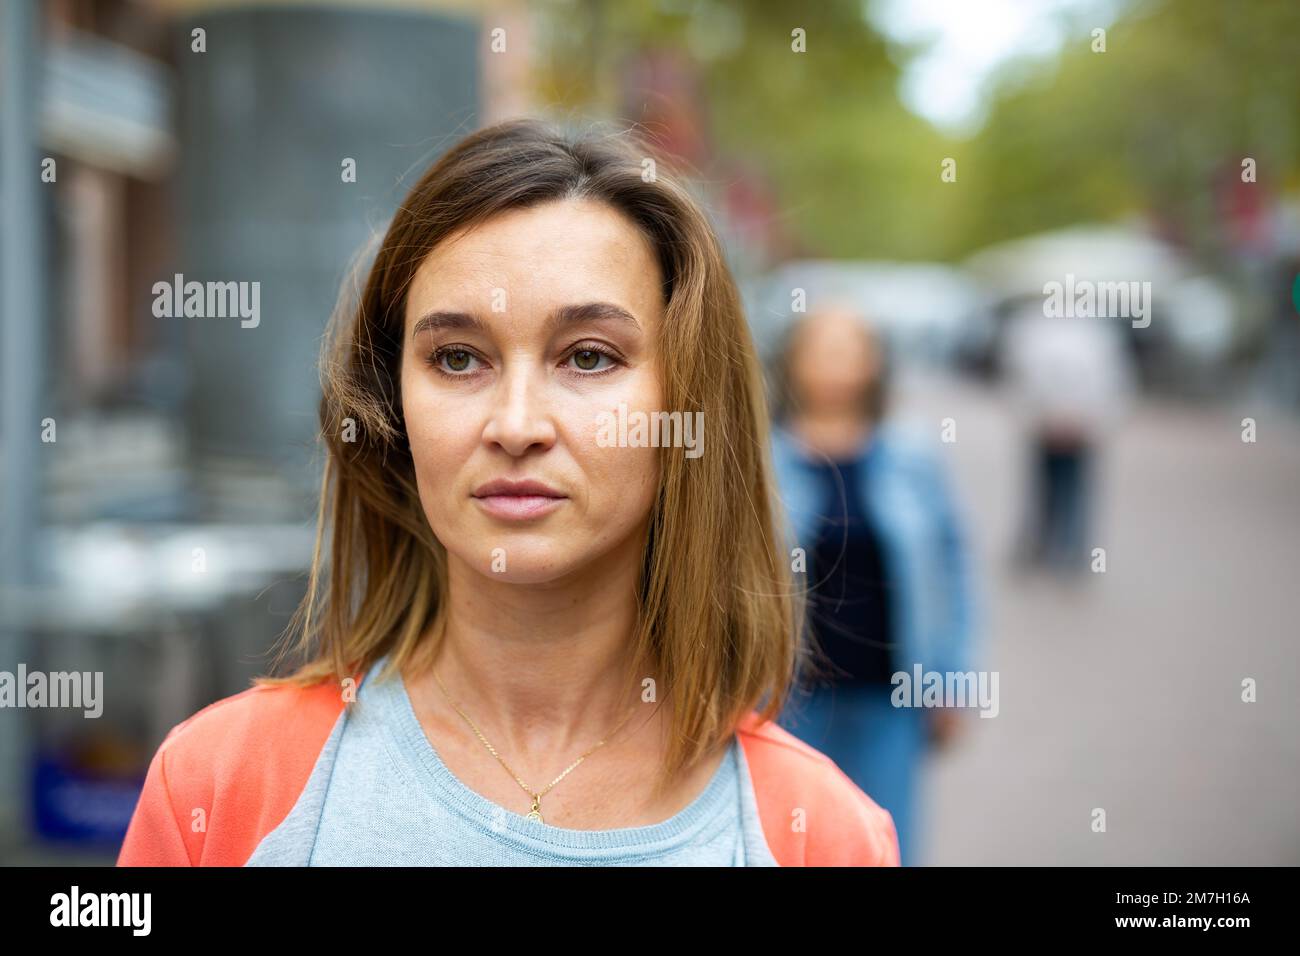 Portrait of brown-haired woman walking along city street Stock Photo